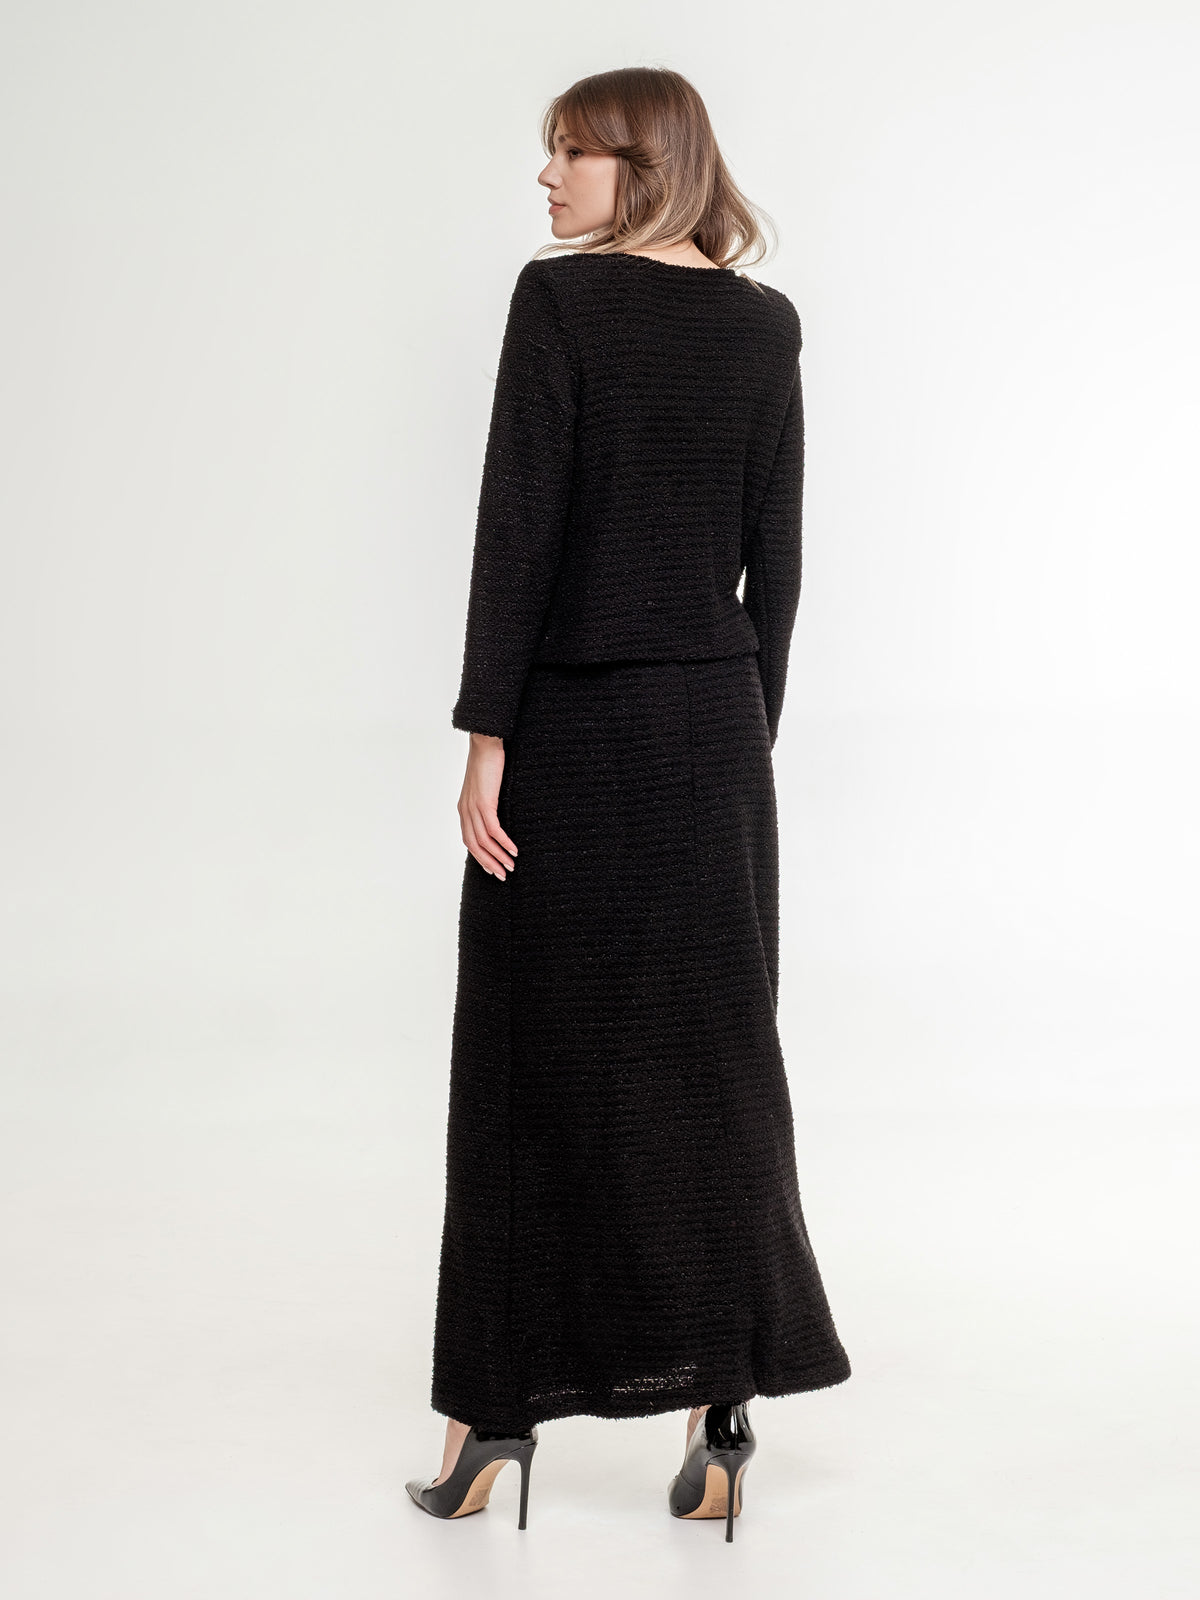 black textured top with long sleeve and long skirt back view